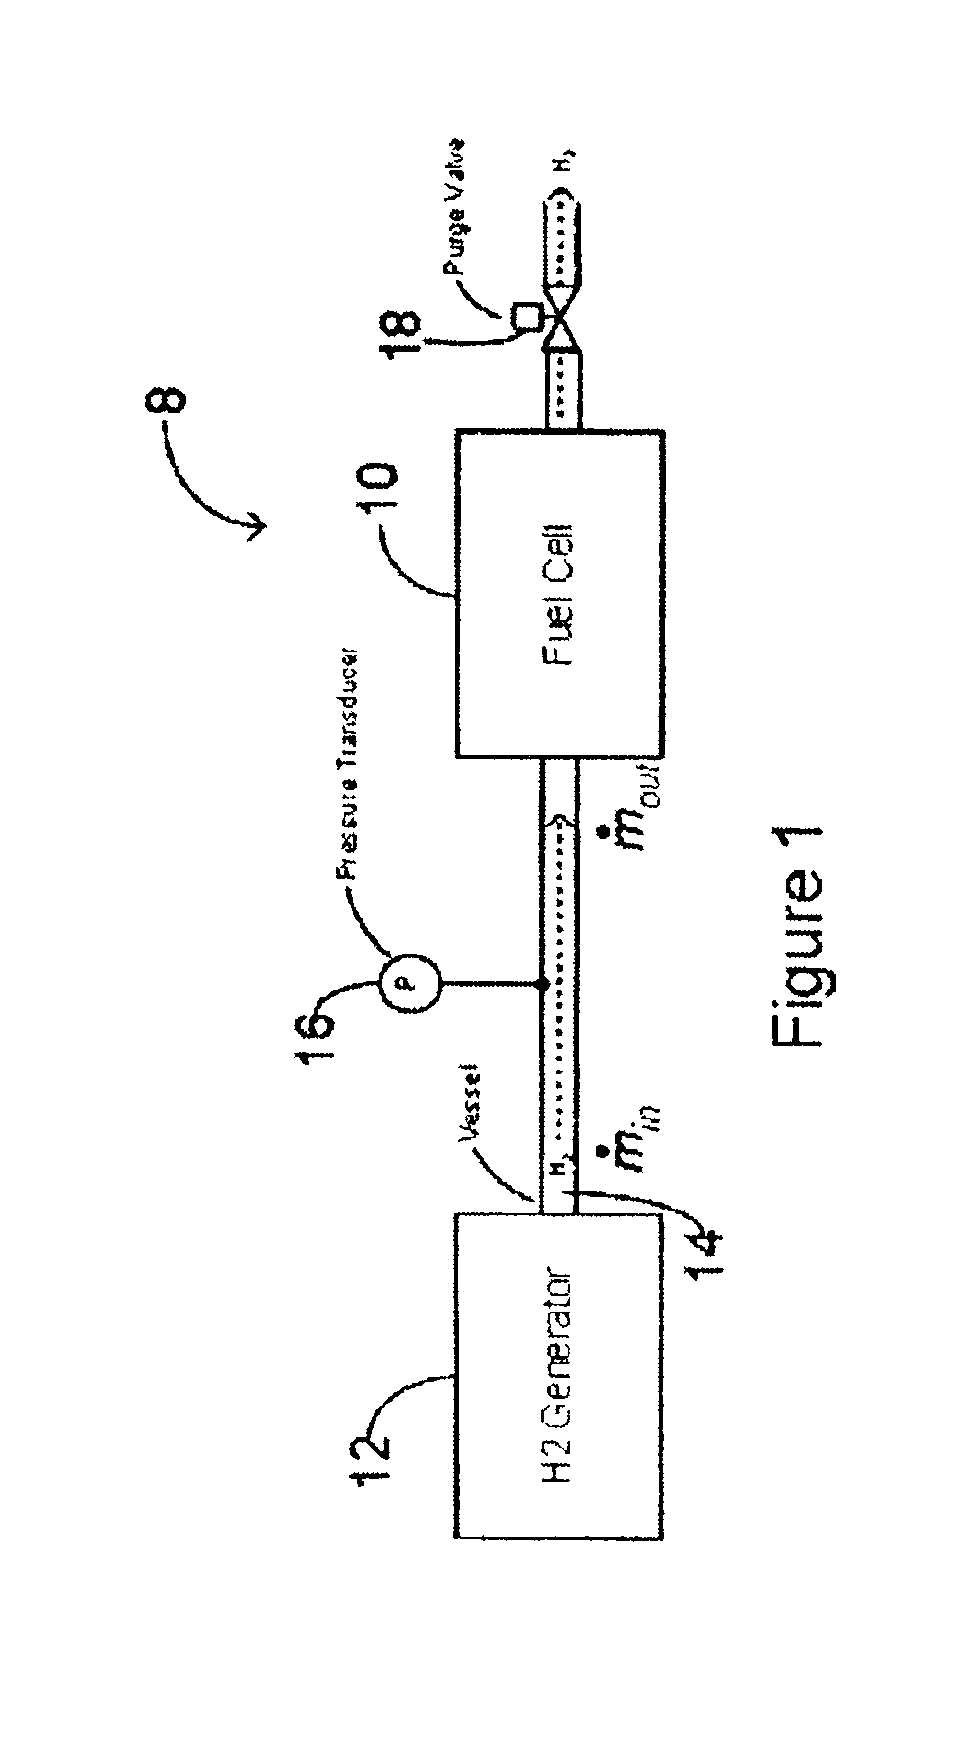 Method and system for controlling the operation of a hydrogen generator and a fuel cell